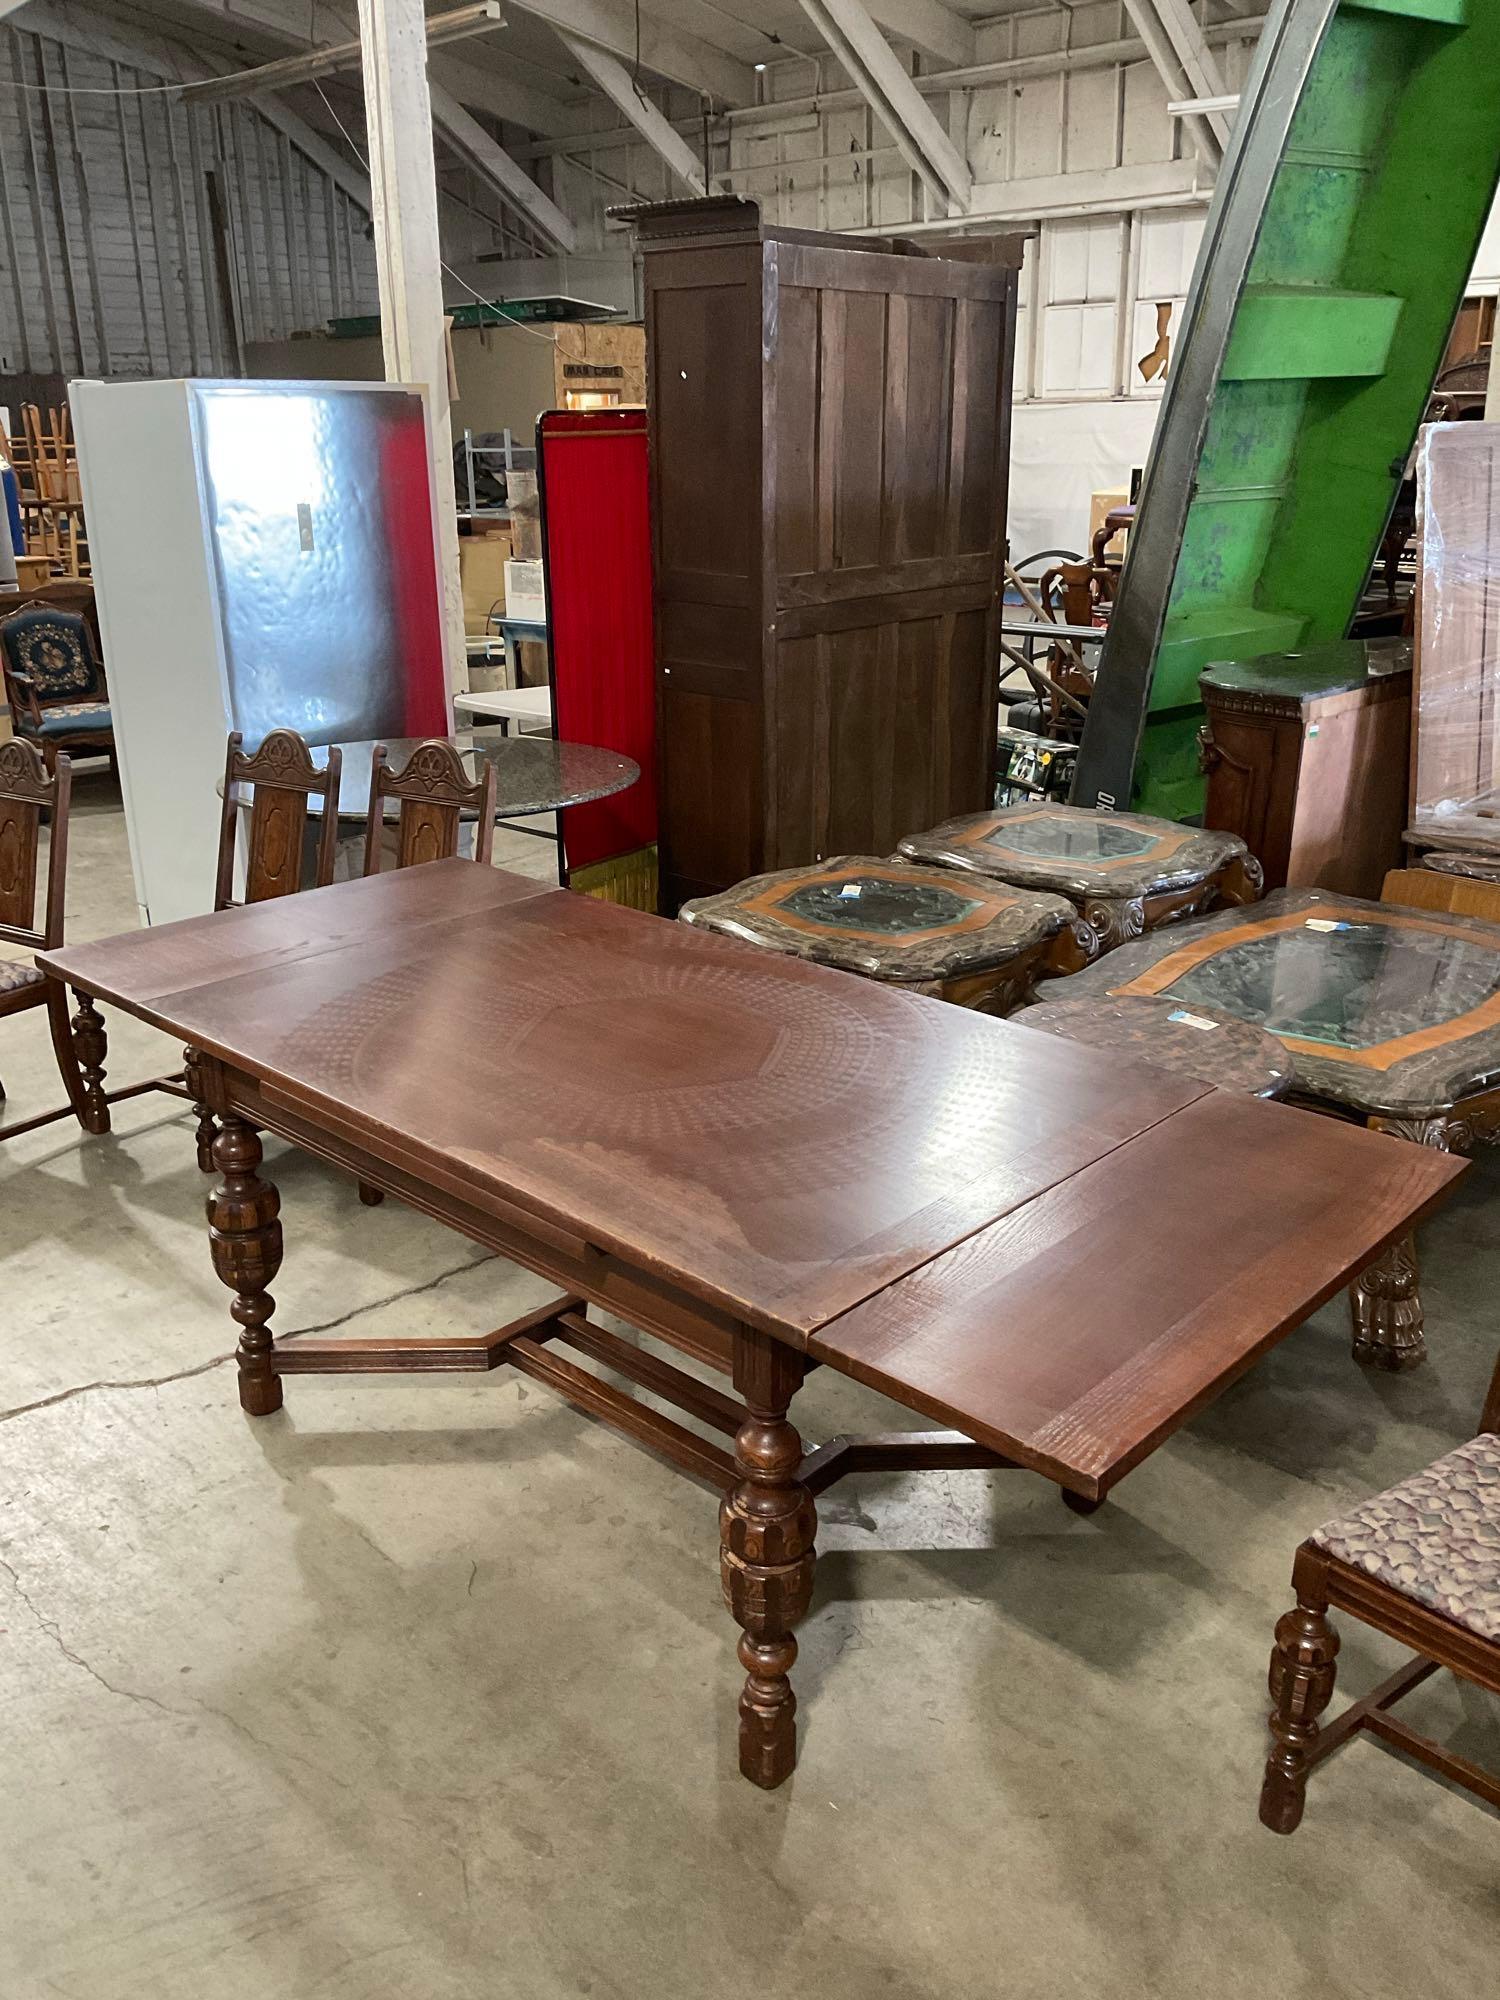 Antique / Vintage Wooden Dining Table w/ 2 Hideaway Leaves & 6 Chairs. Measures 60" x 31" See pics.